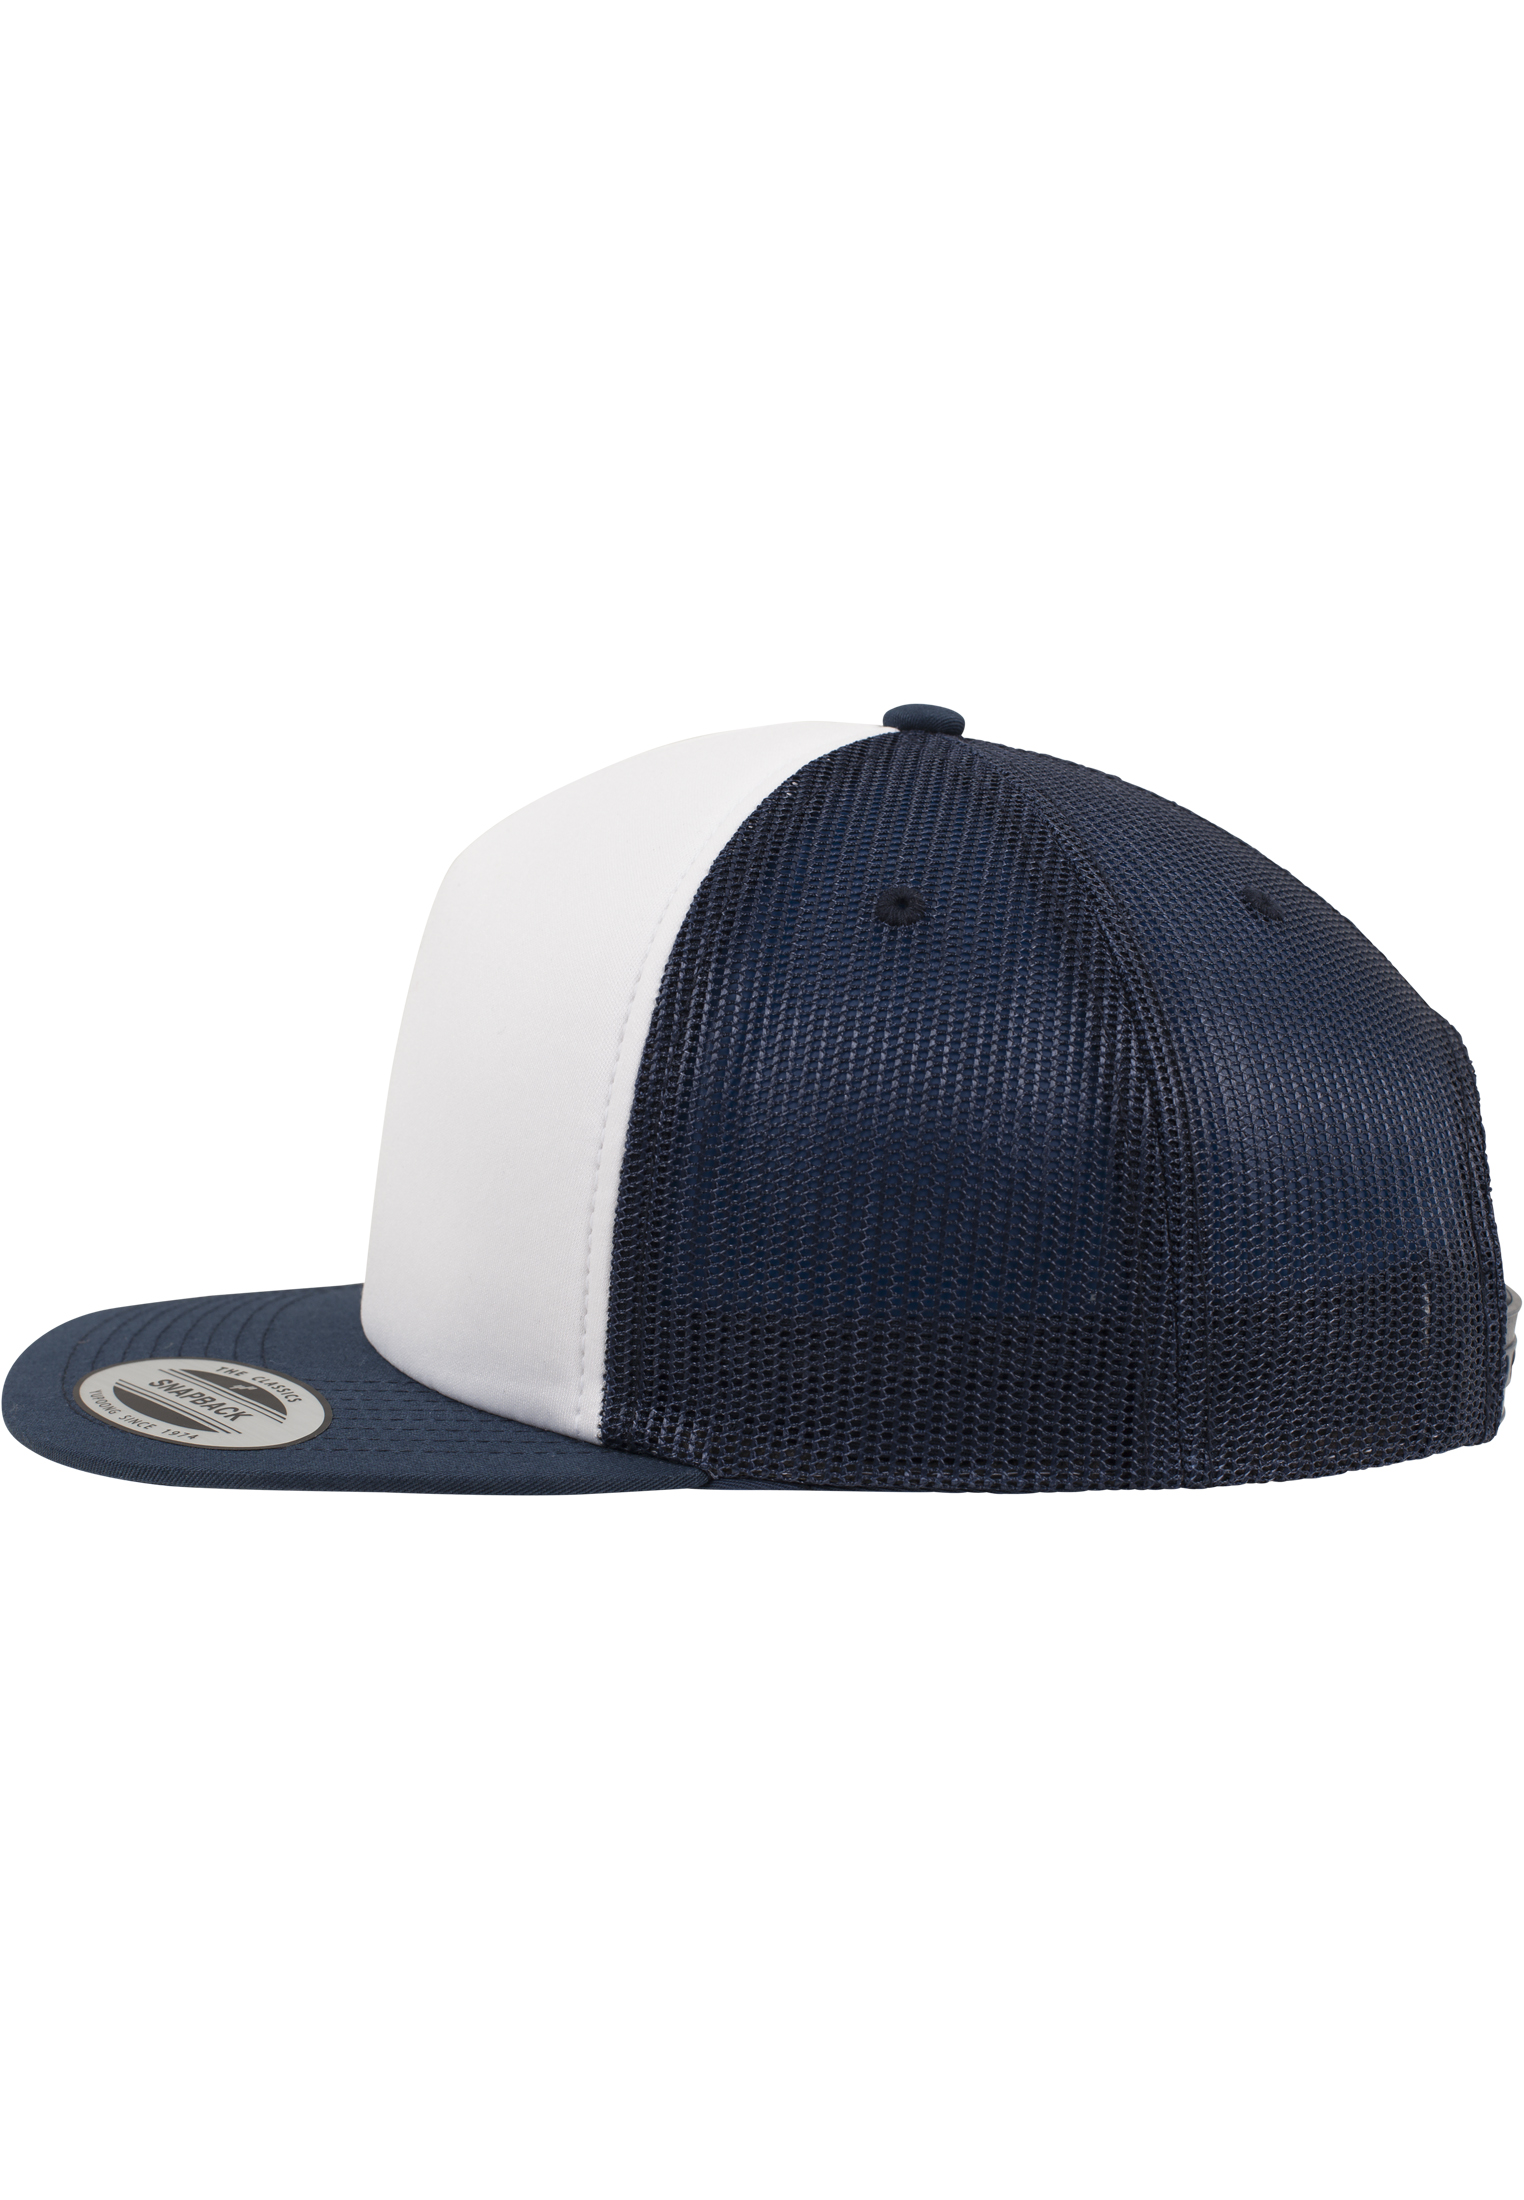 Trucker Foam Trucker with White Front in Farbe nvy/wht/nvy